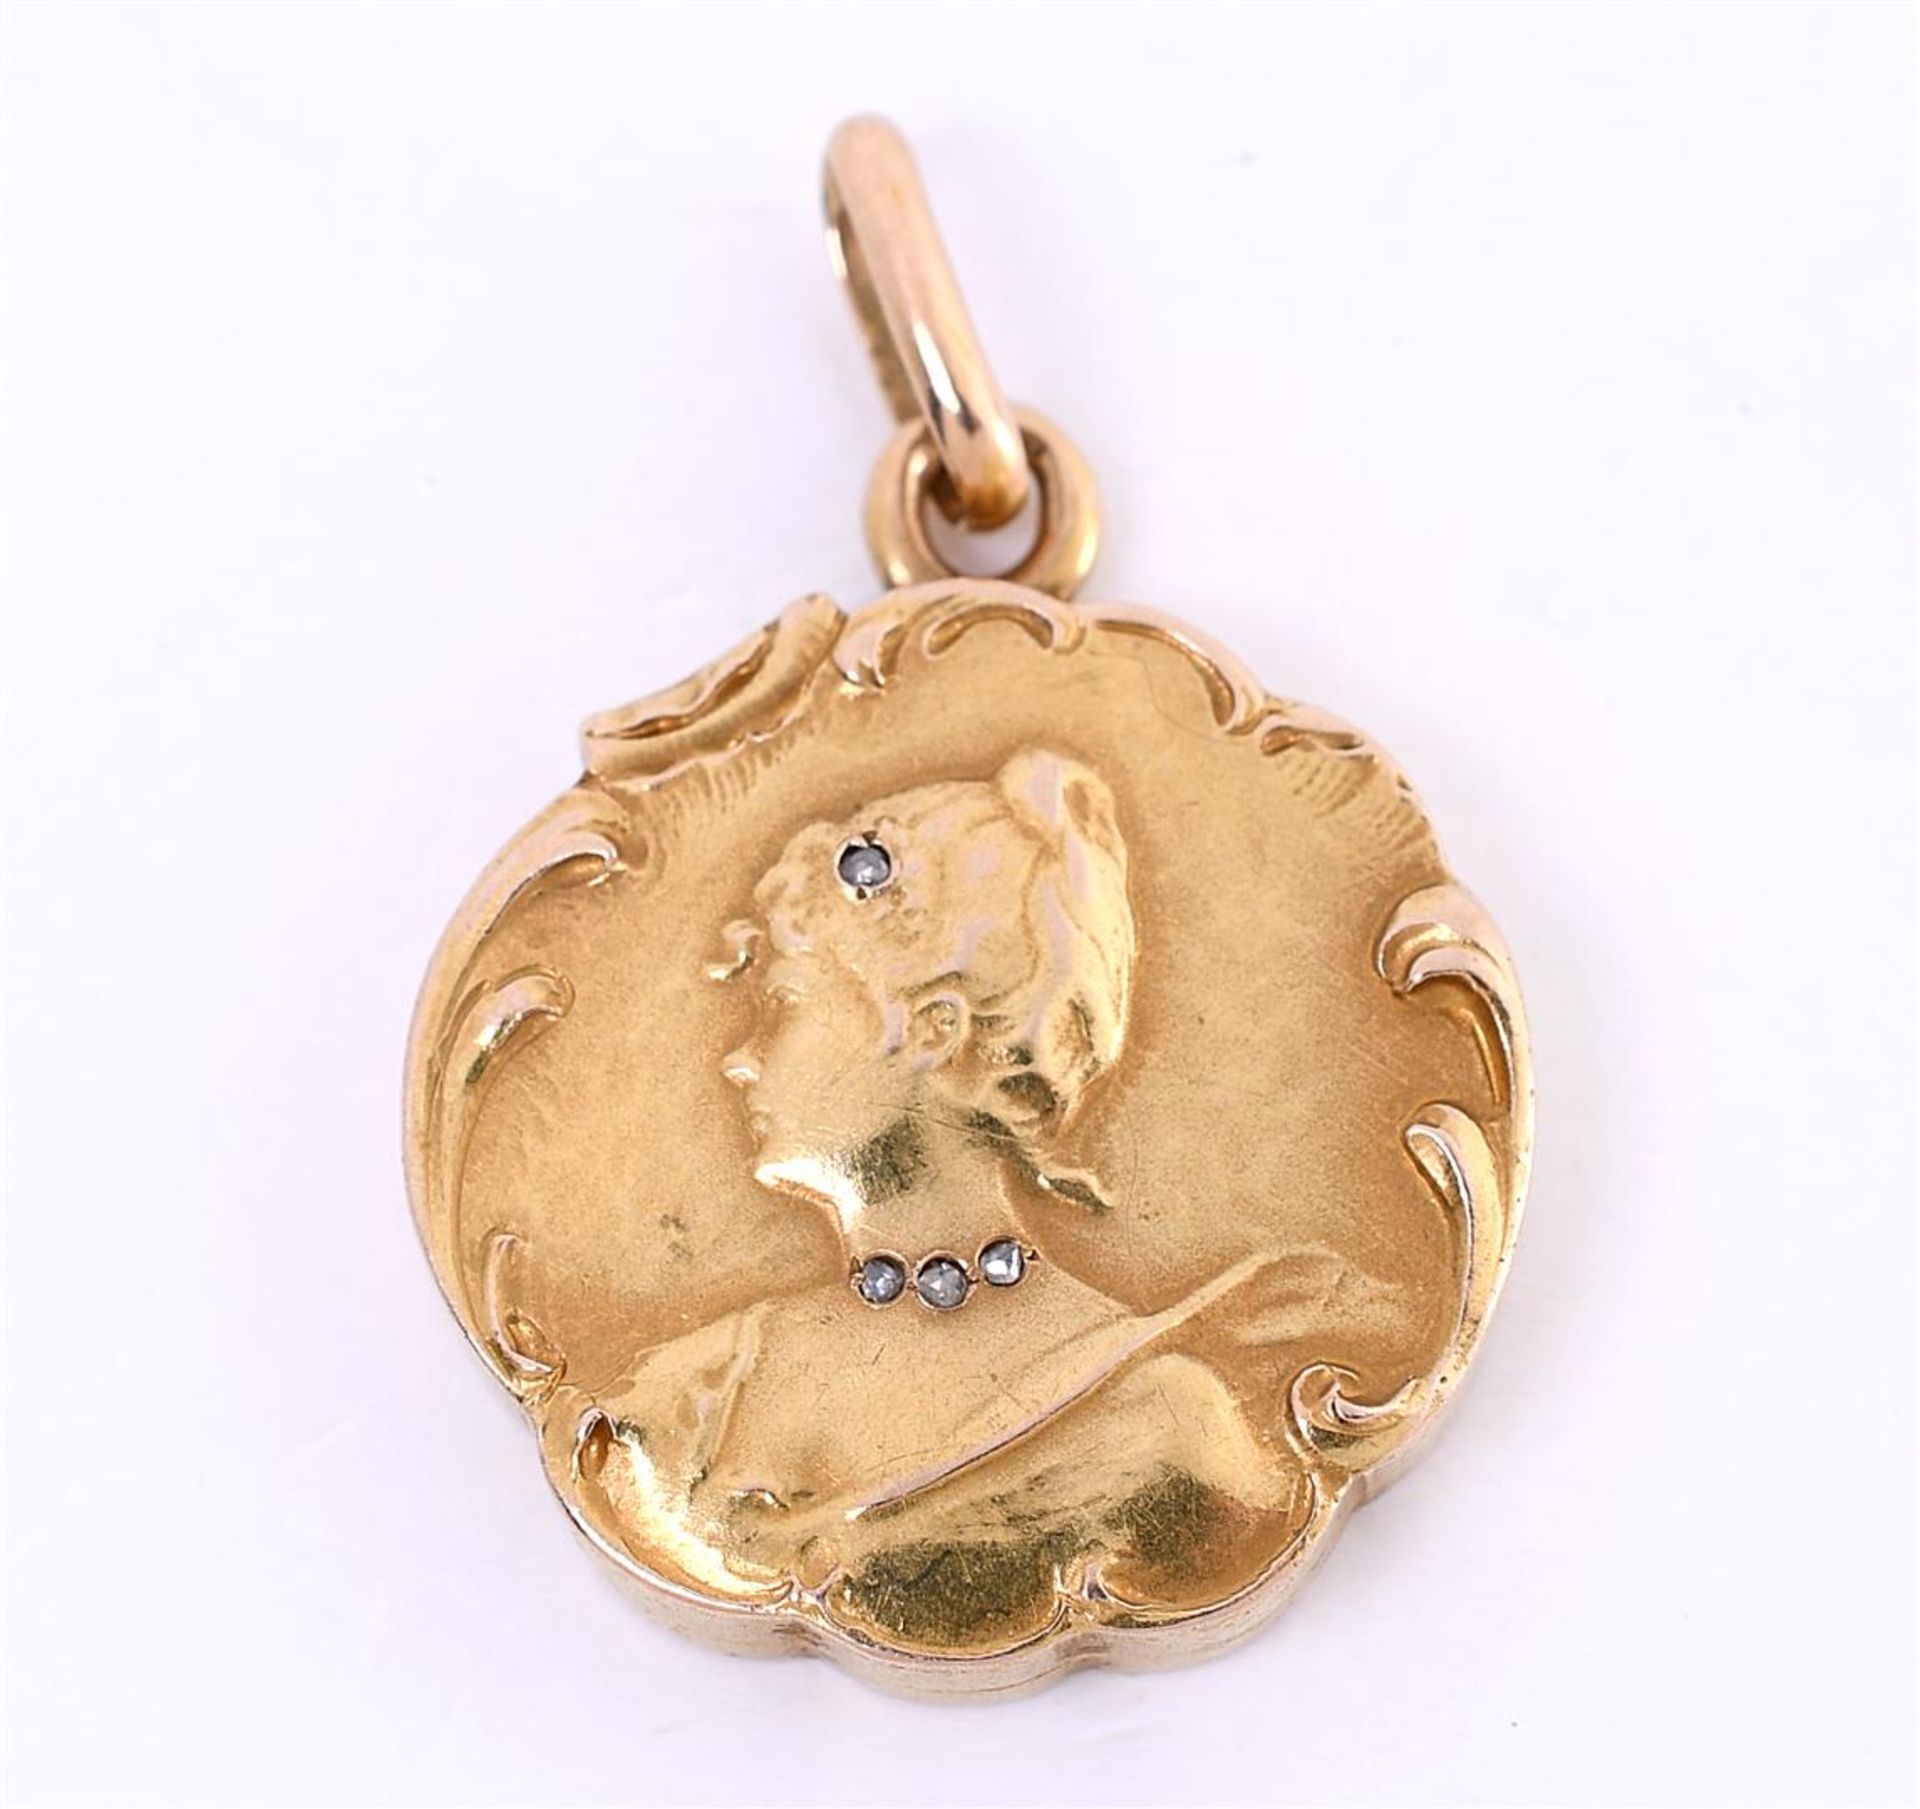 Art Noveau medallion photo pendant in 14 carat yellow gold, round with image of a woman's head set w